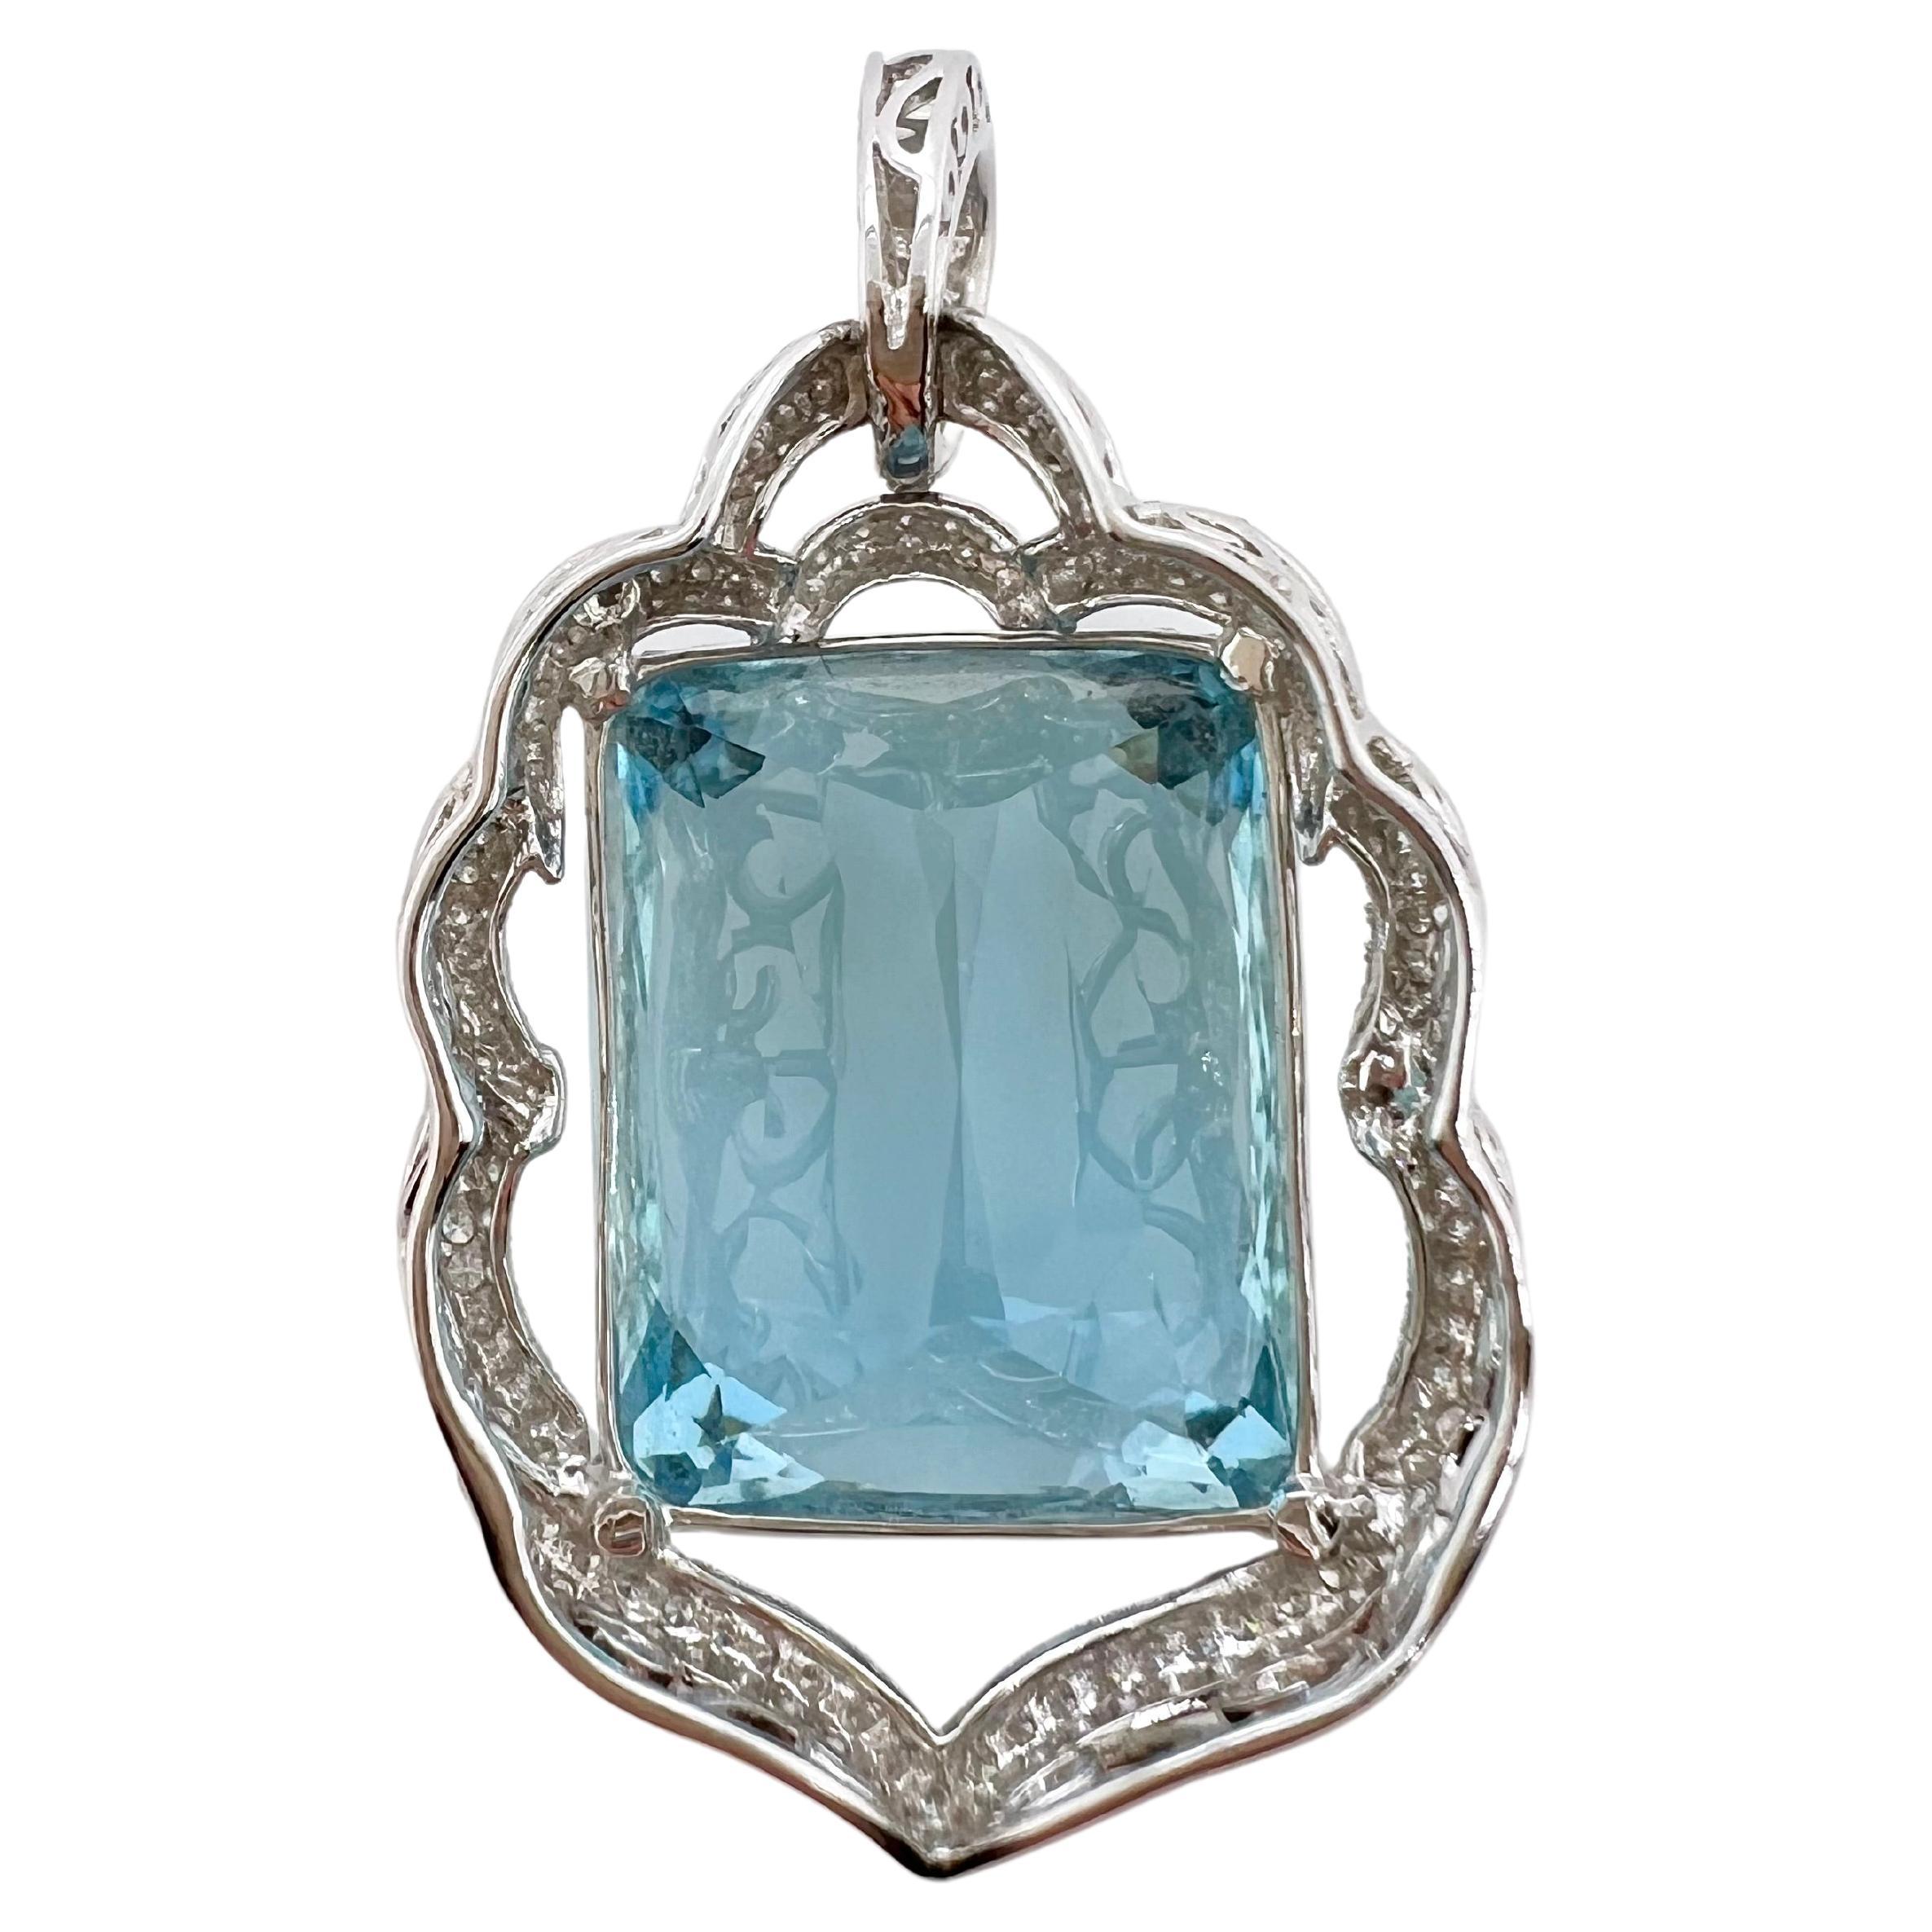 This stunning piece of aquamarine will be an heirloom piece for generations to come.  The deep, saturated blue hue in the Aquamarine is to marvel at while places in a tailored diamond pavé frame.  The round brilliant diamonds create a beautiful